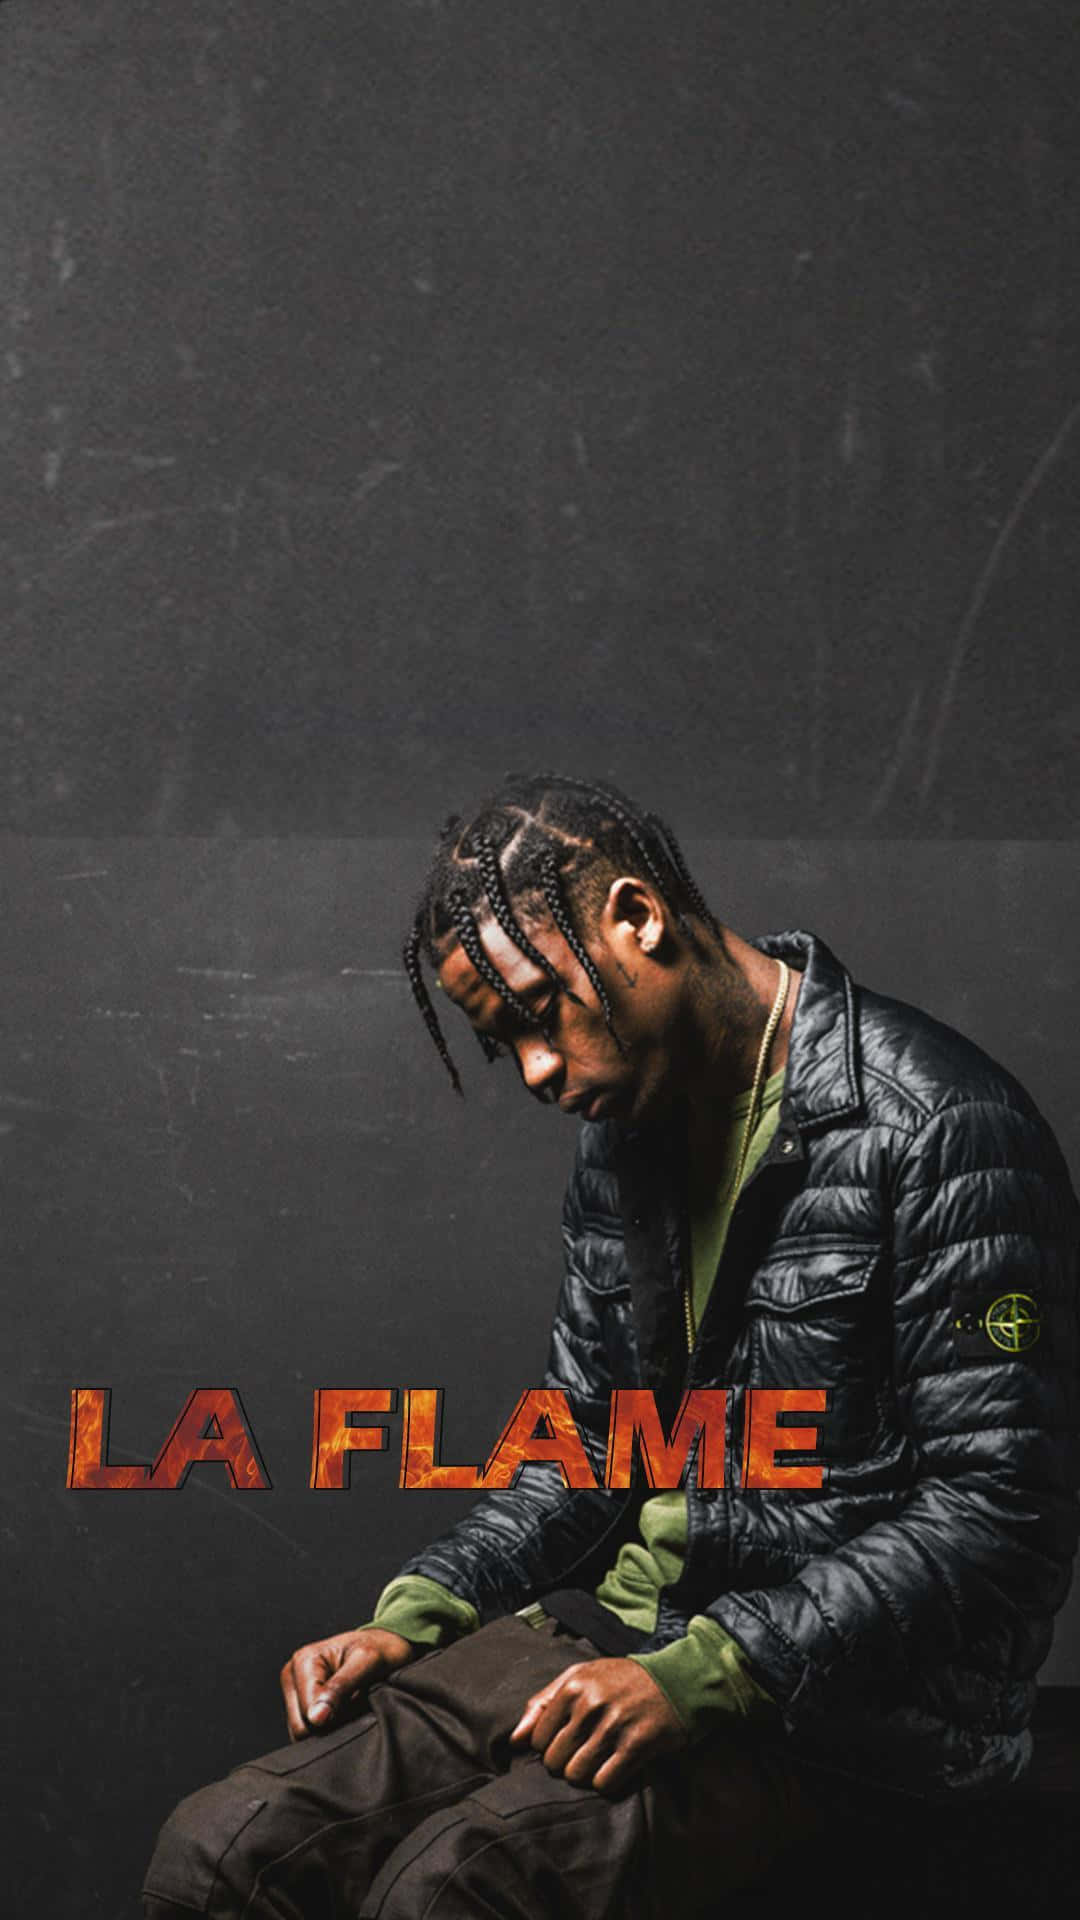 Stay on top of all the latest trends with the Travis Scott Iphone Wallpaper